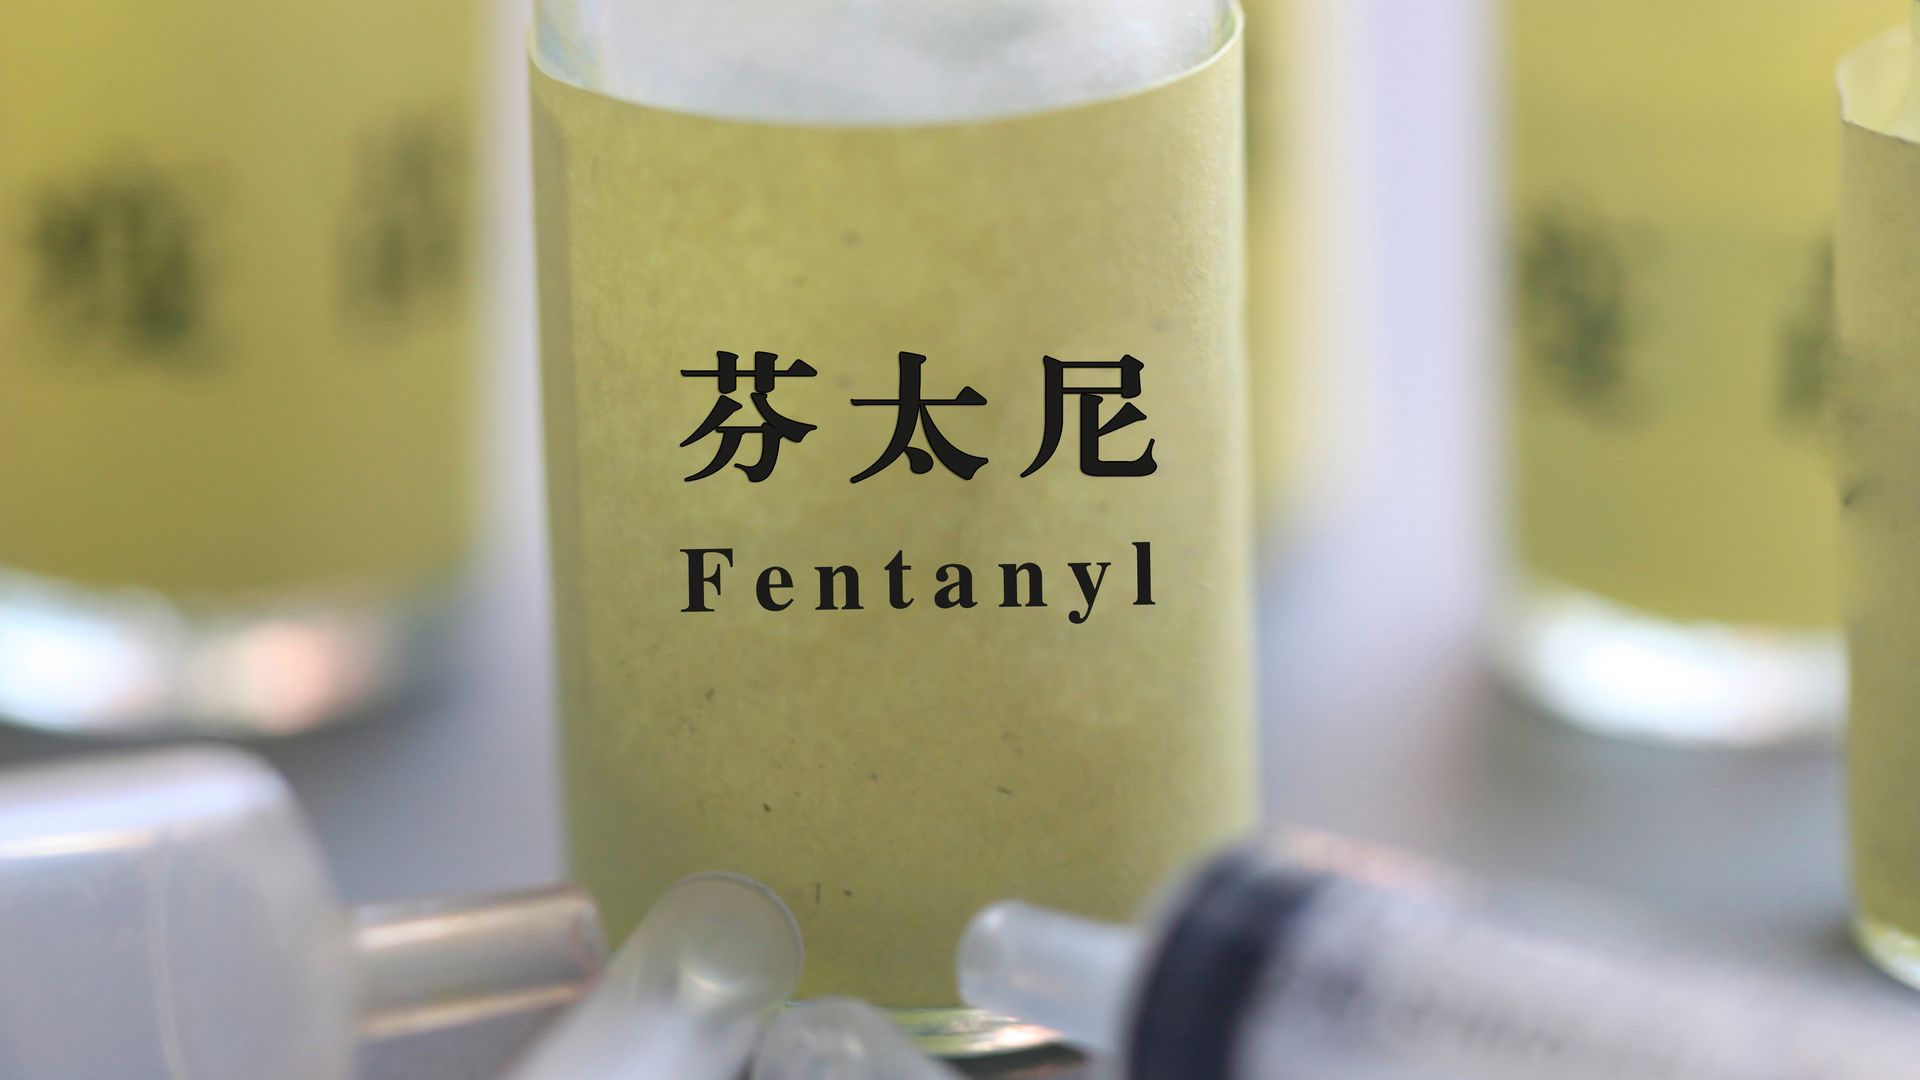 While the fentanyl agreement with China is positive, Biden must tackle the root causes of substance abuse in the U.S.